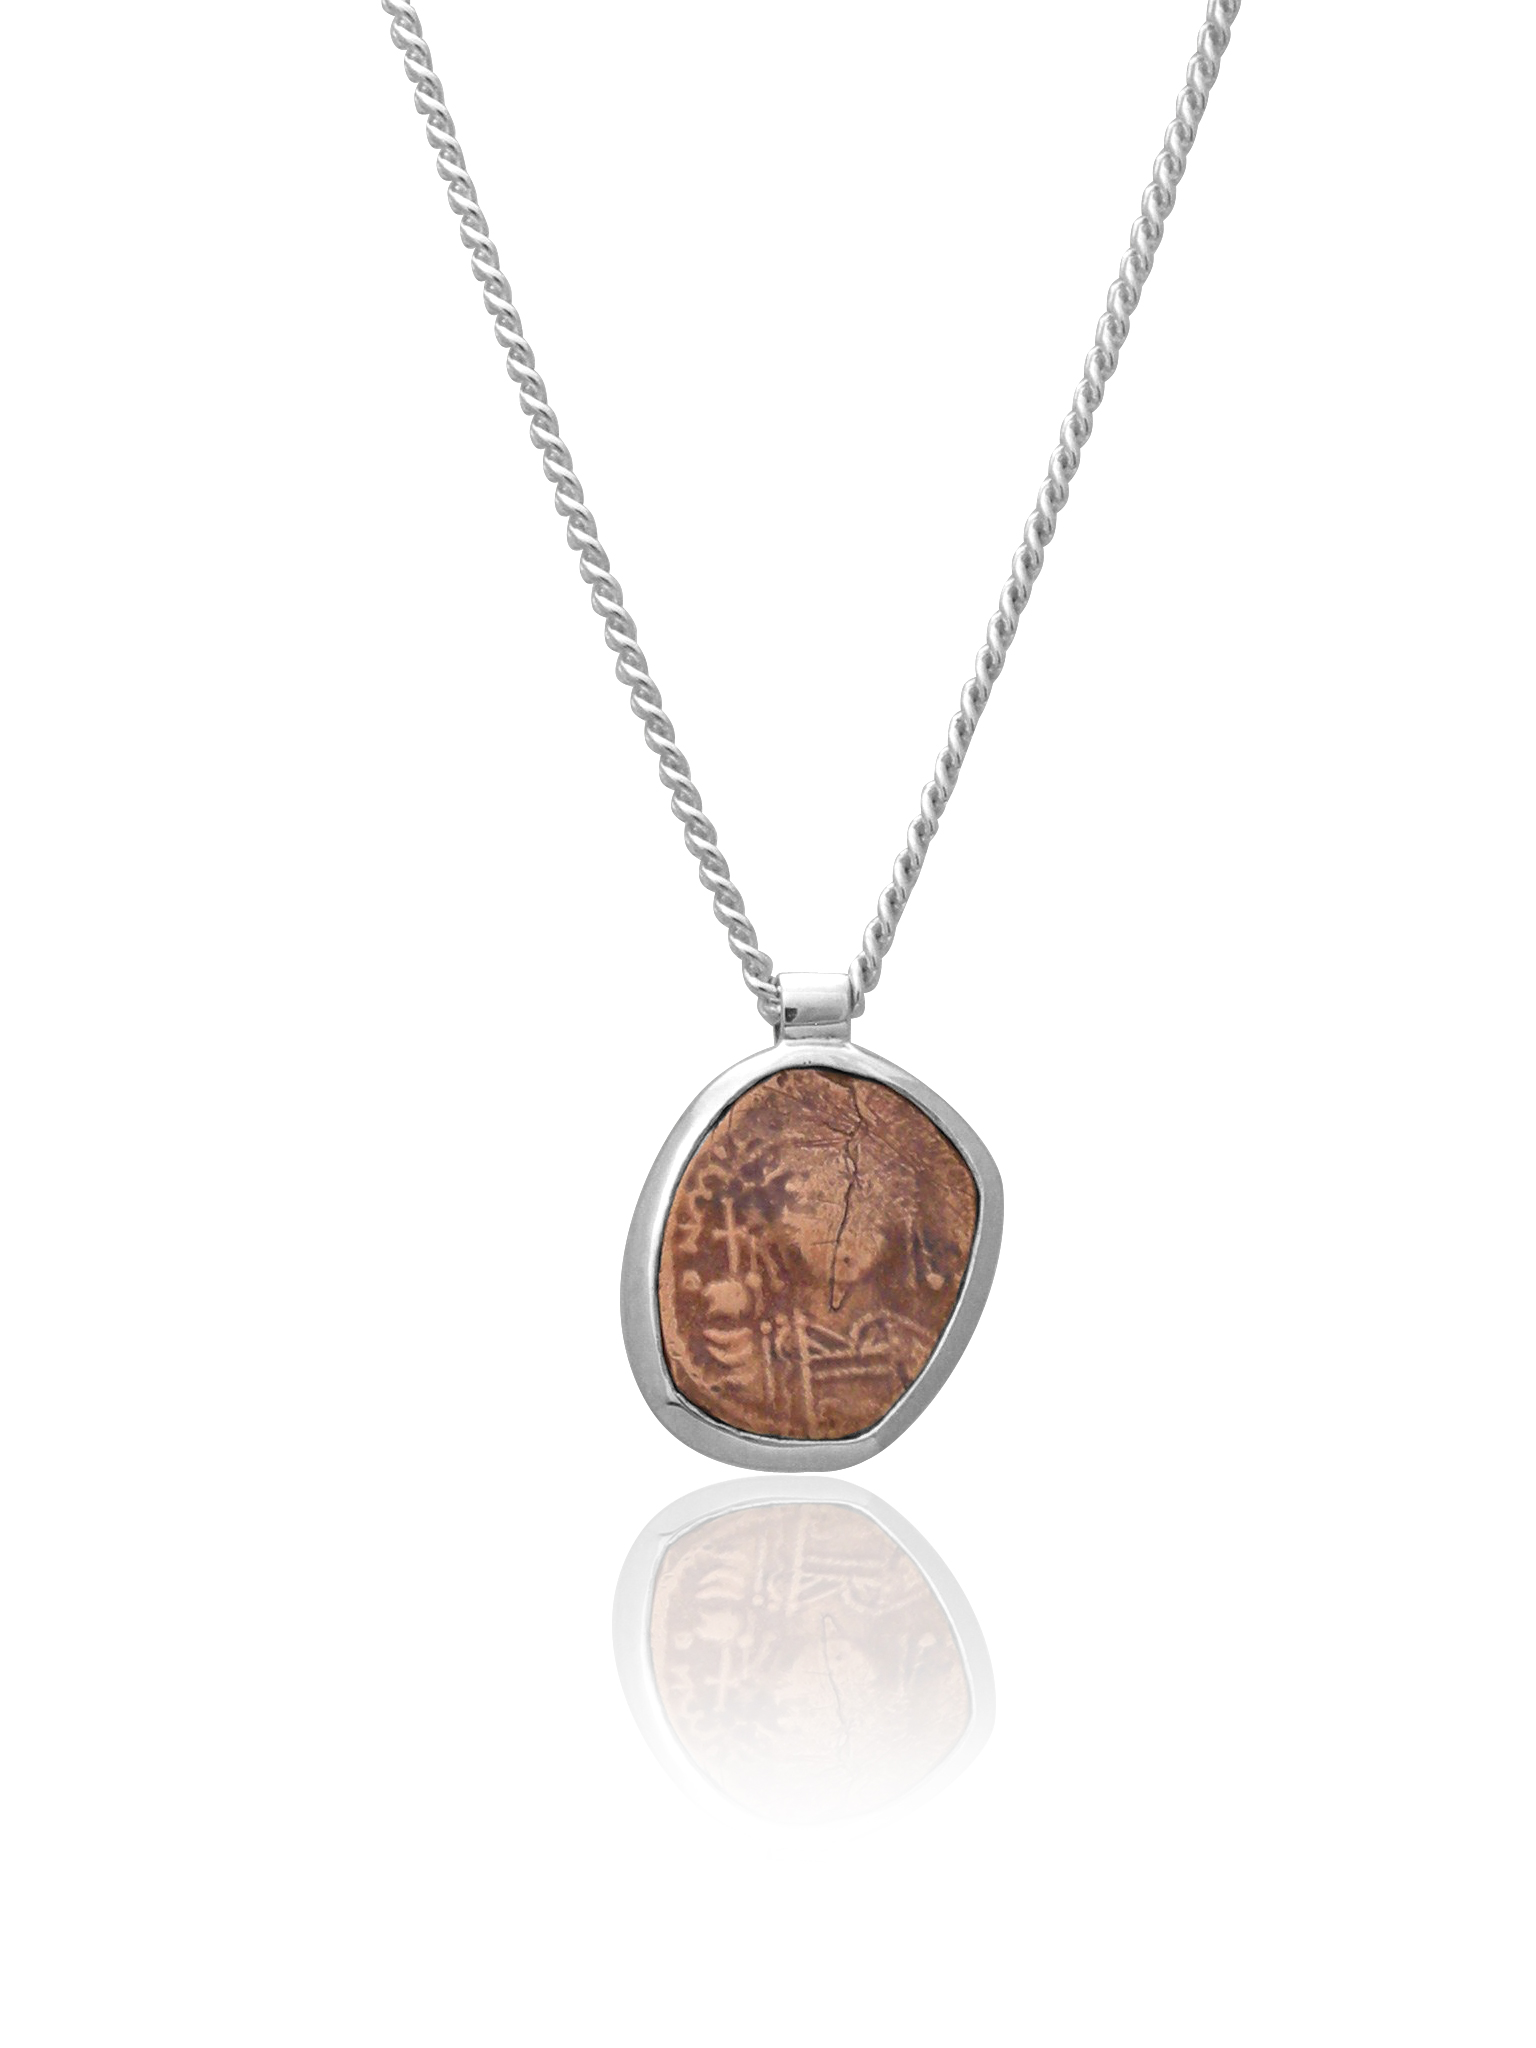 Andy-coin-pendant.jpg